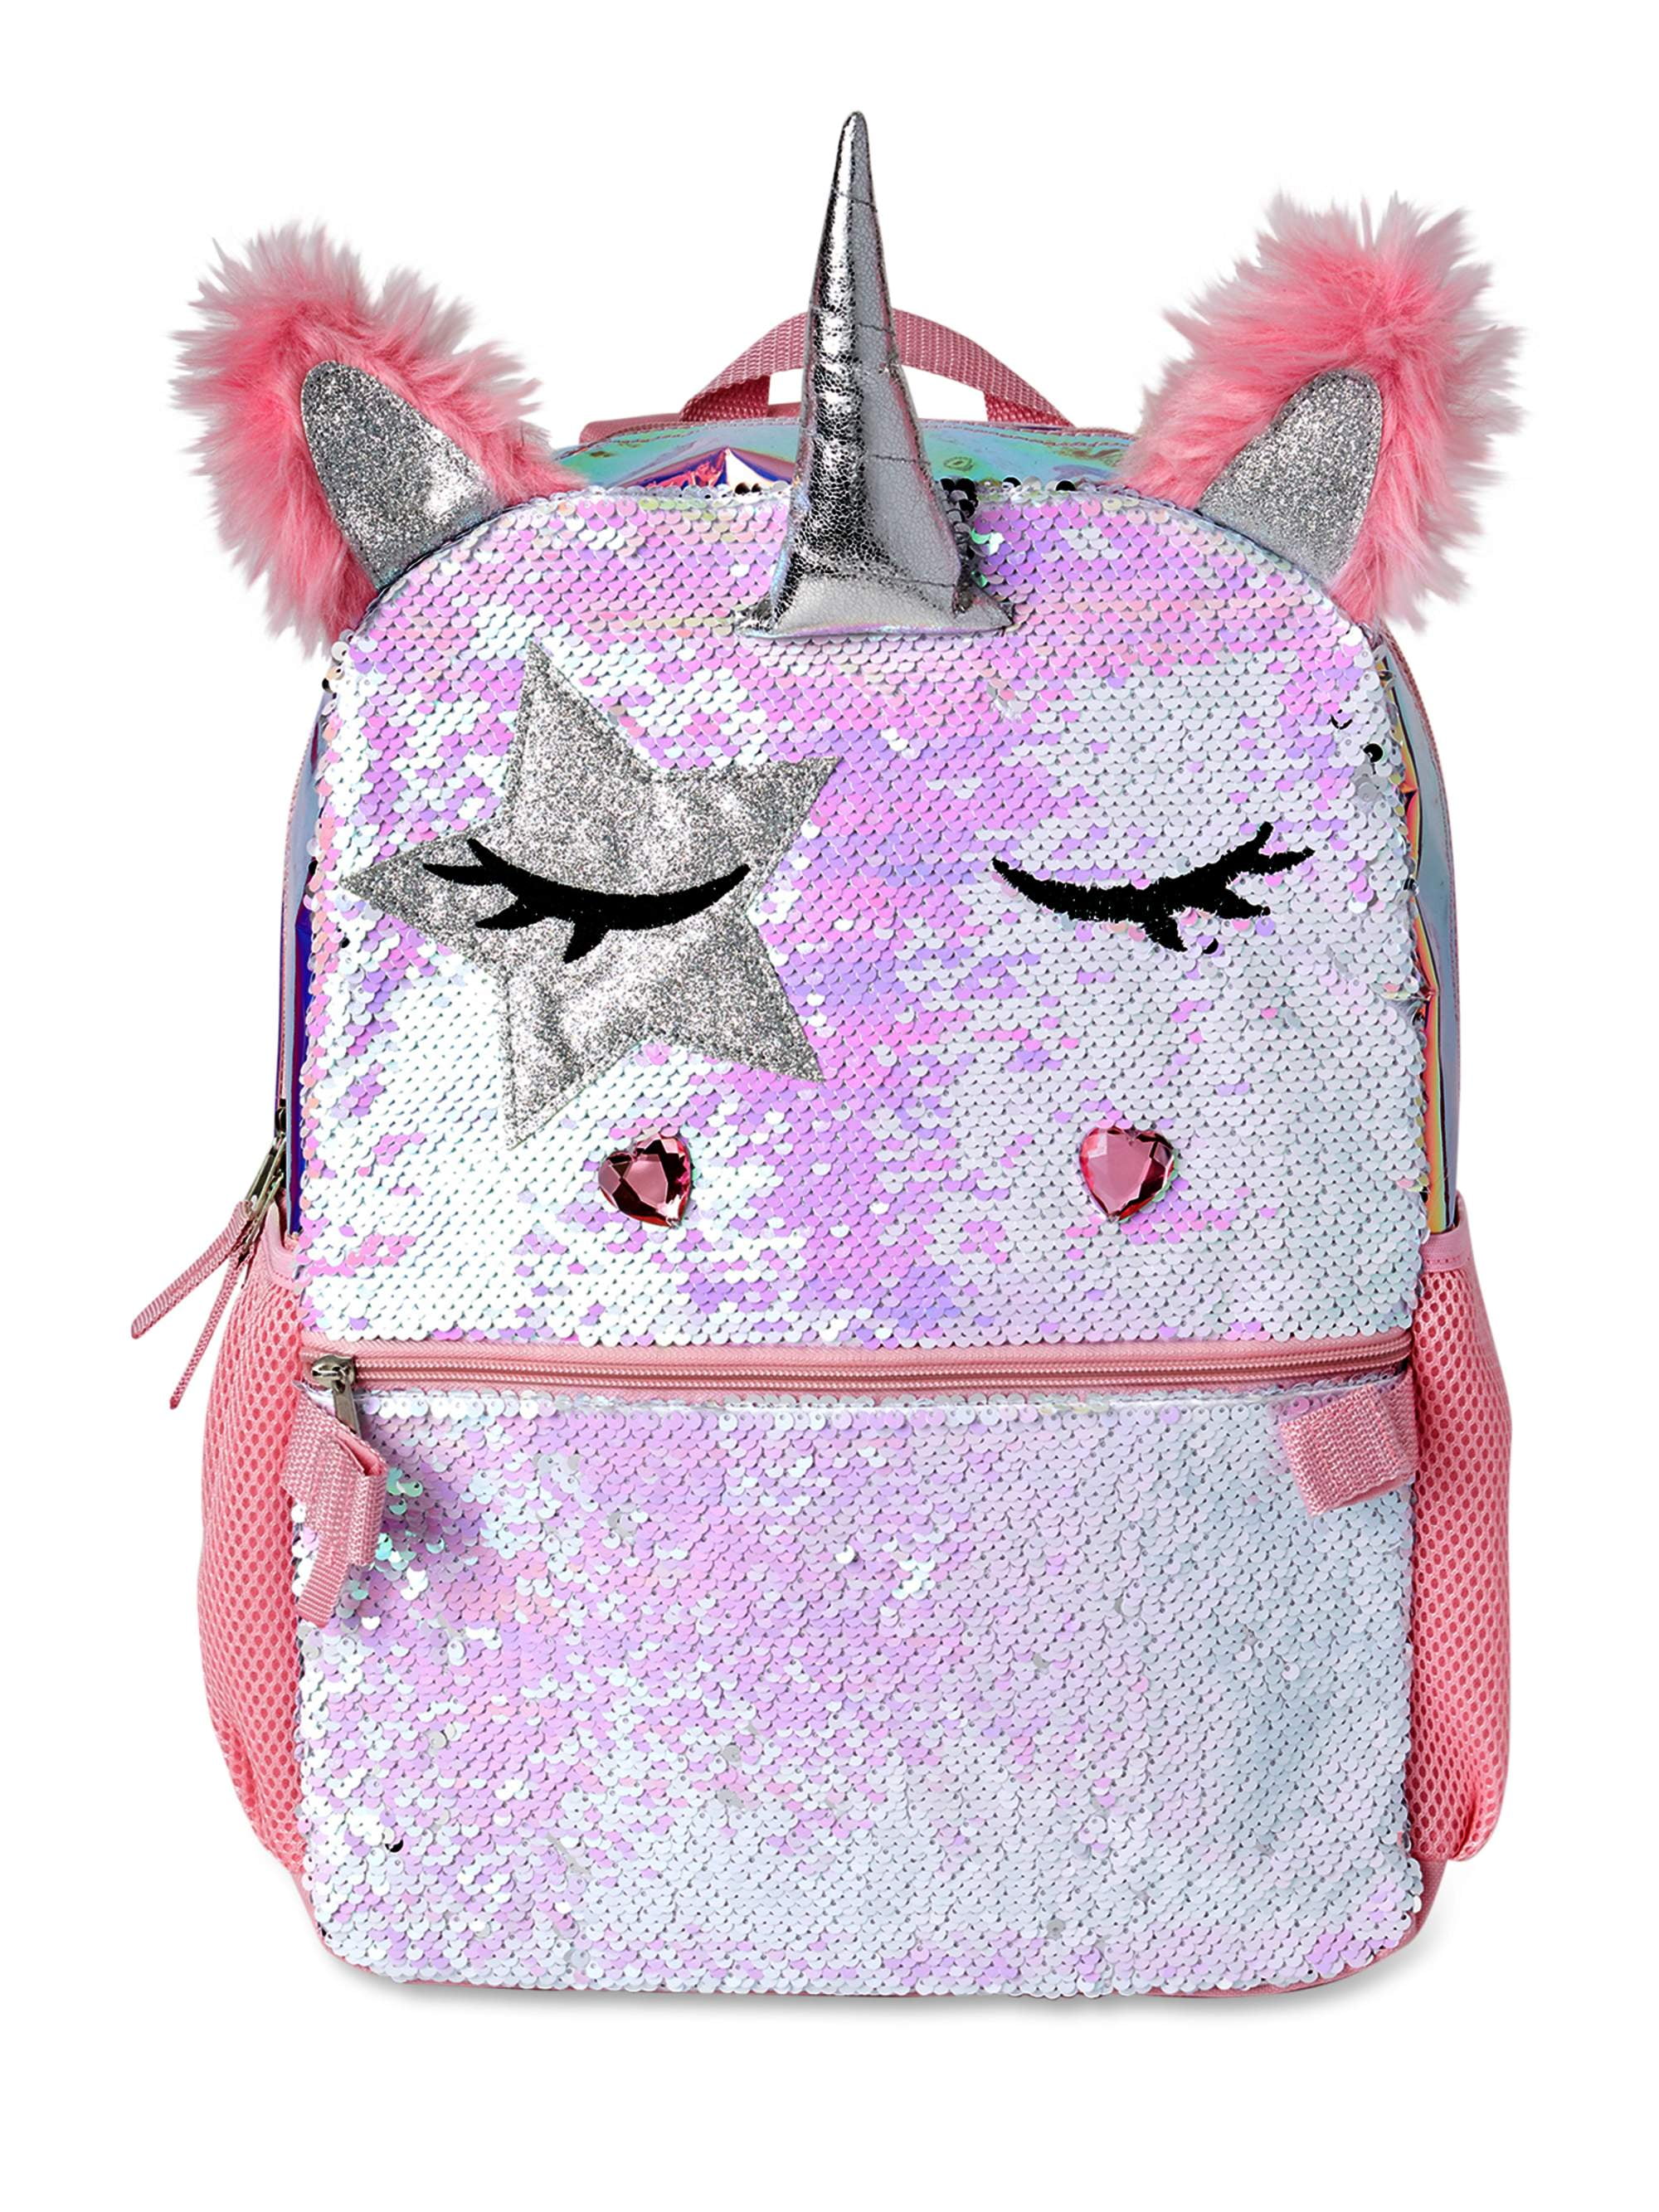 Details about   Wonder Nation Girls Faux Fur Unicorn Backpack Rainbow Colors New NWT 